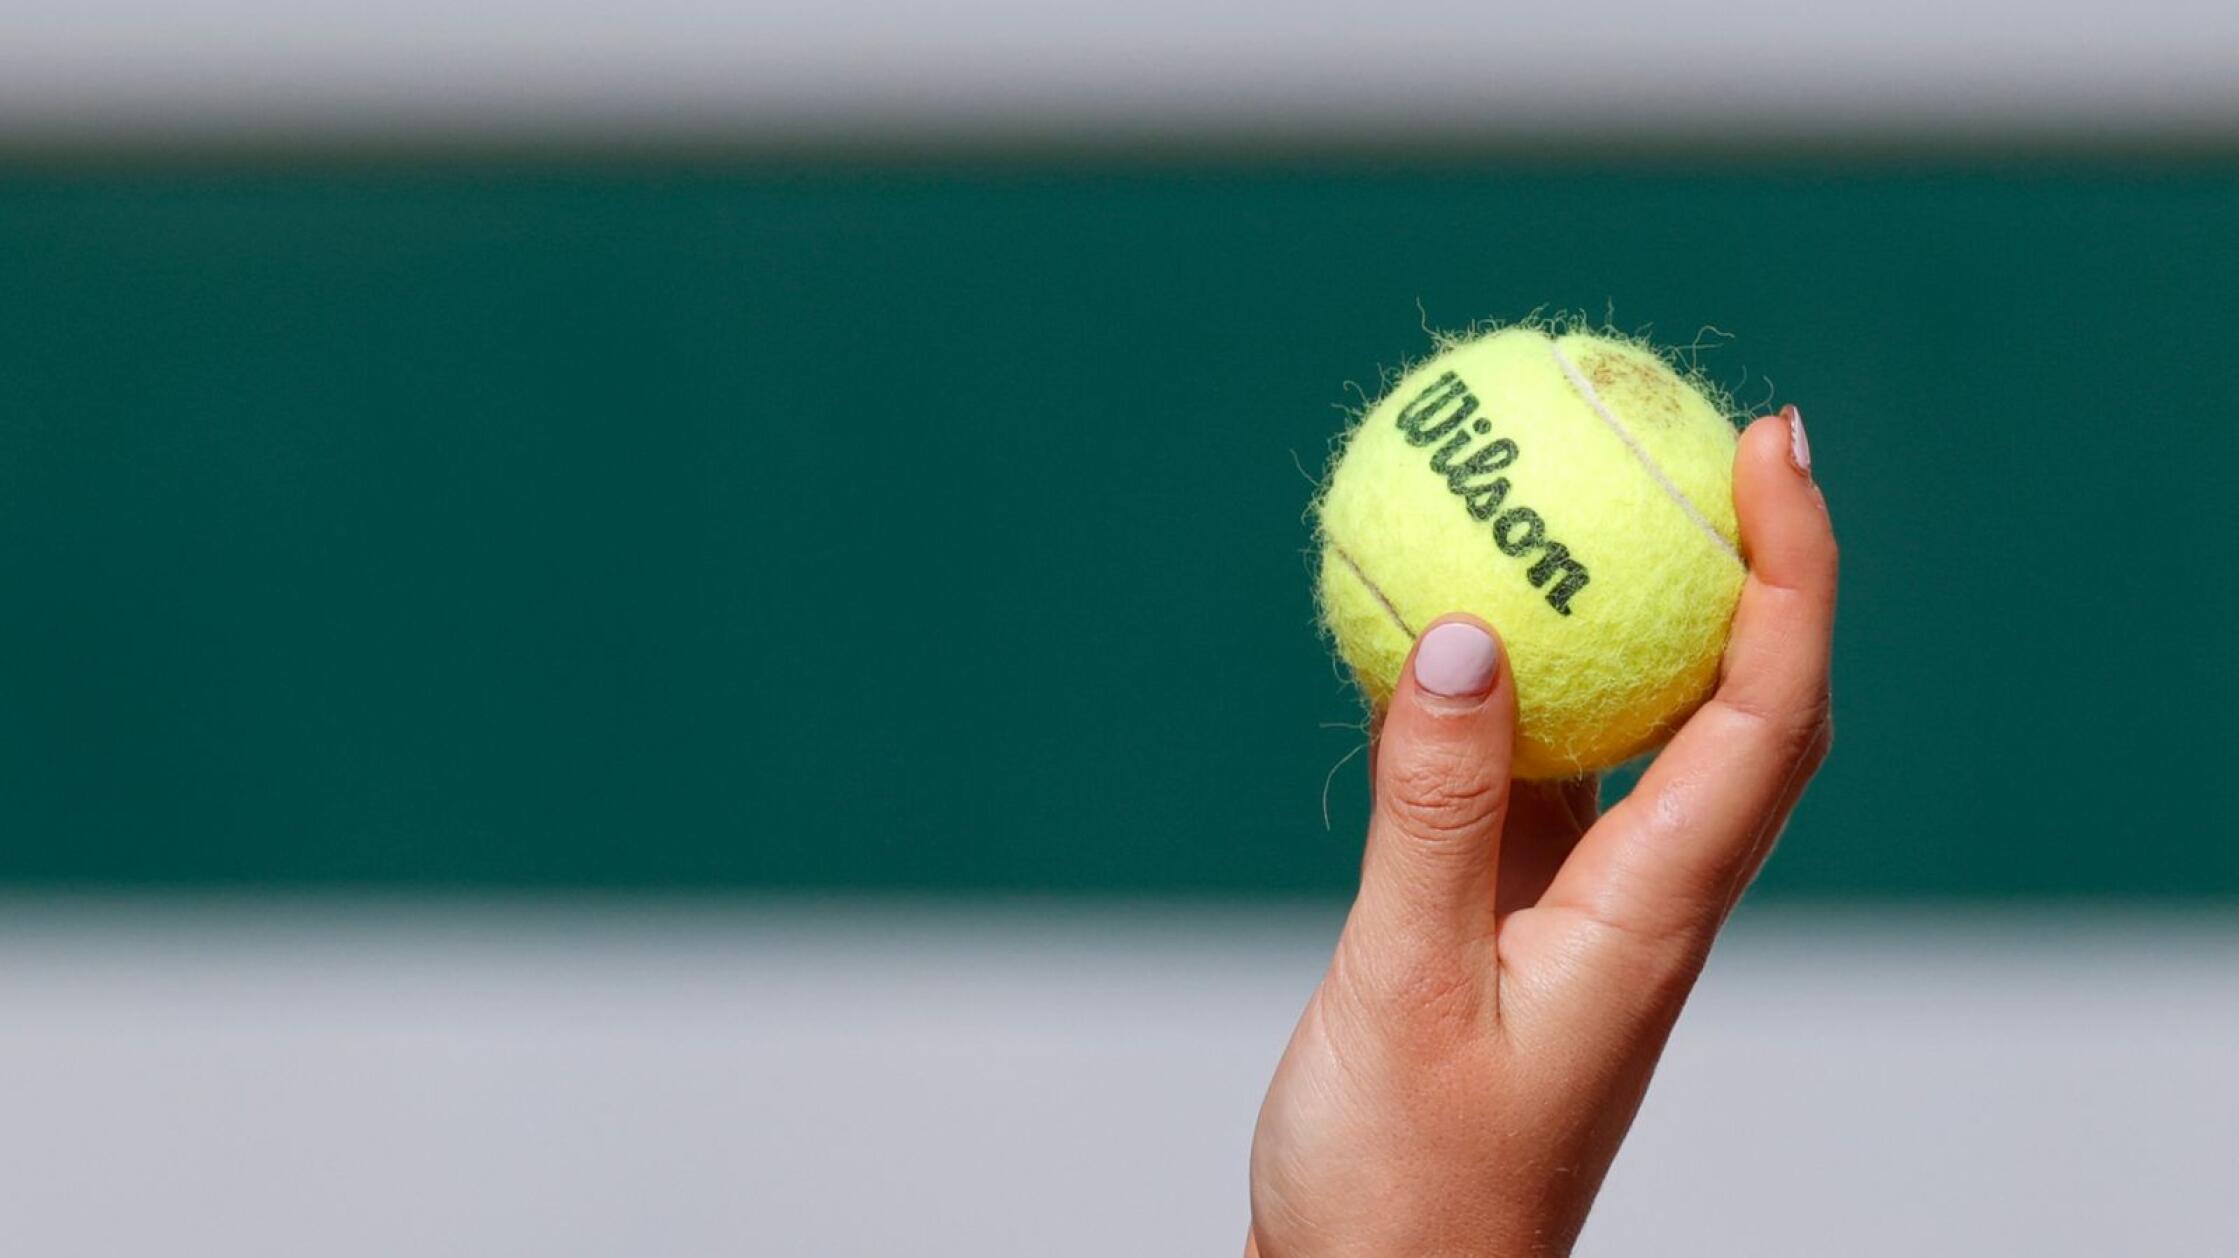 General view of a tennis ball being held up during a tennis match